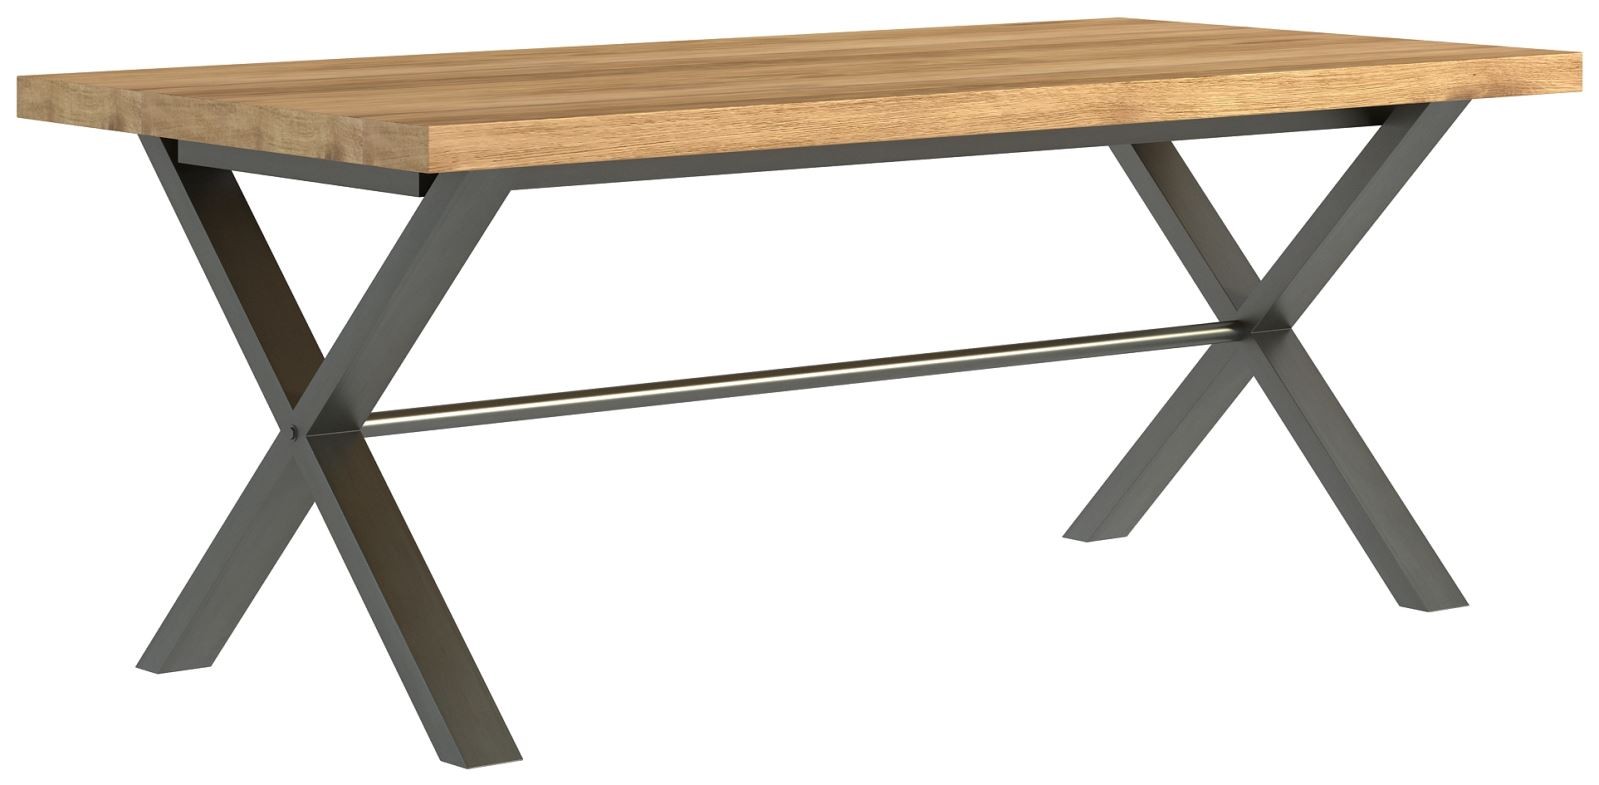 Wentwood Industrial Oak Large Dining Table